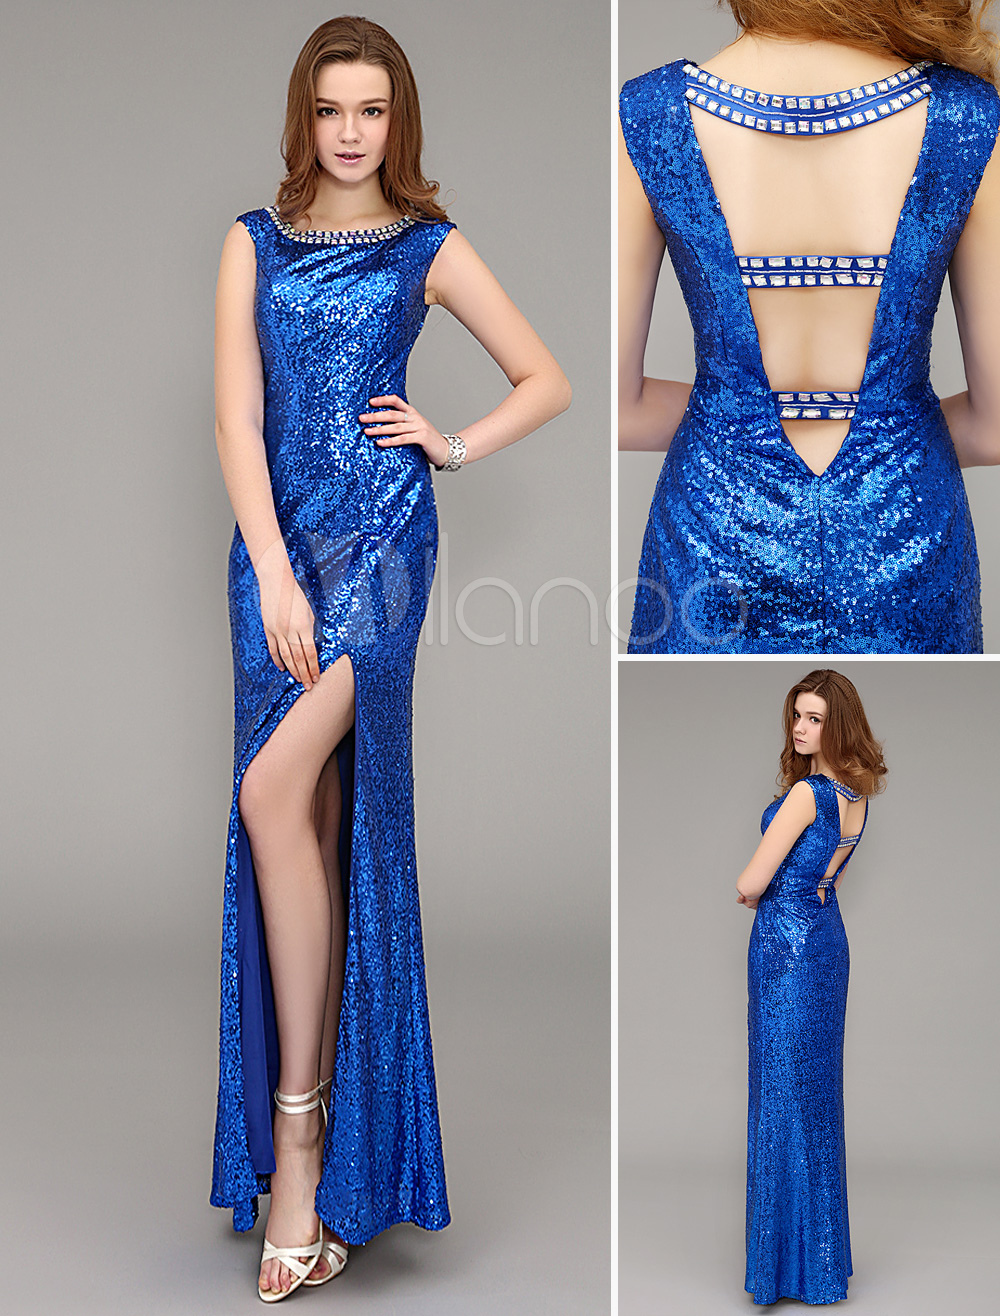 Royal Blue Long Sequined Evening Dress With Jeweled Neck and Open Back (Wedding Evening Dresses) photo